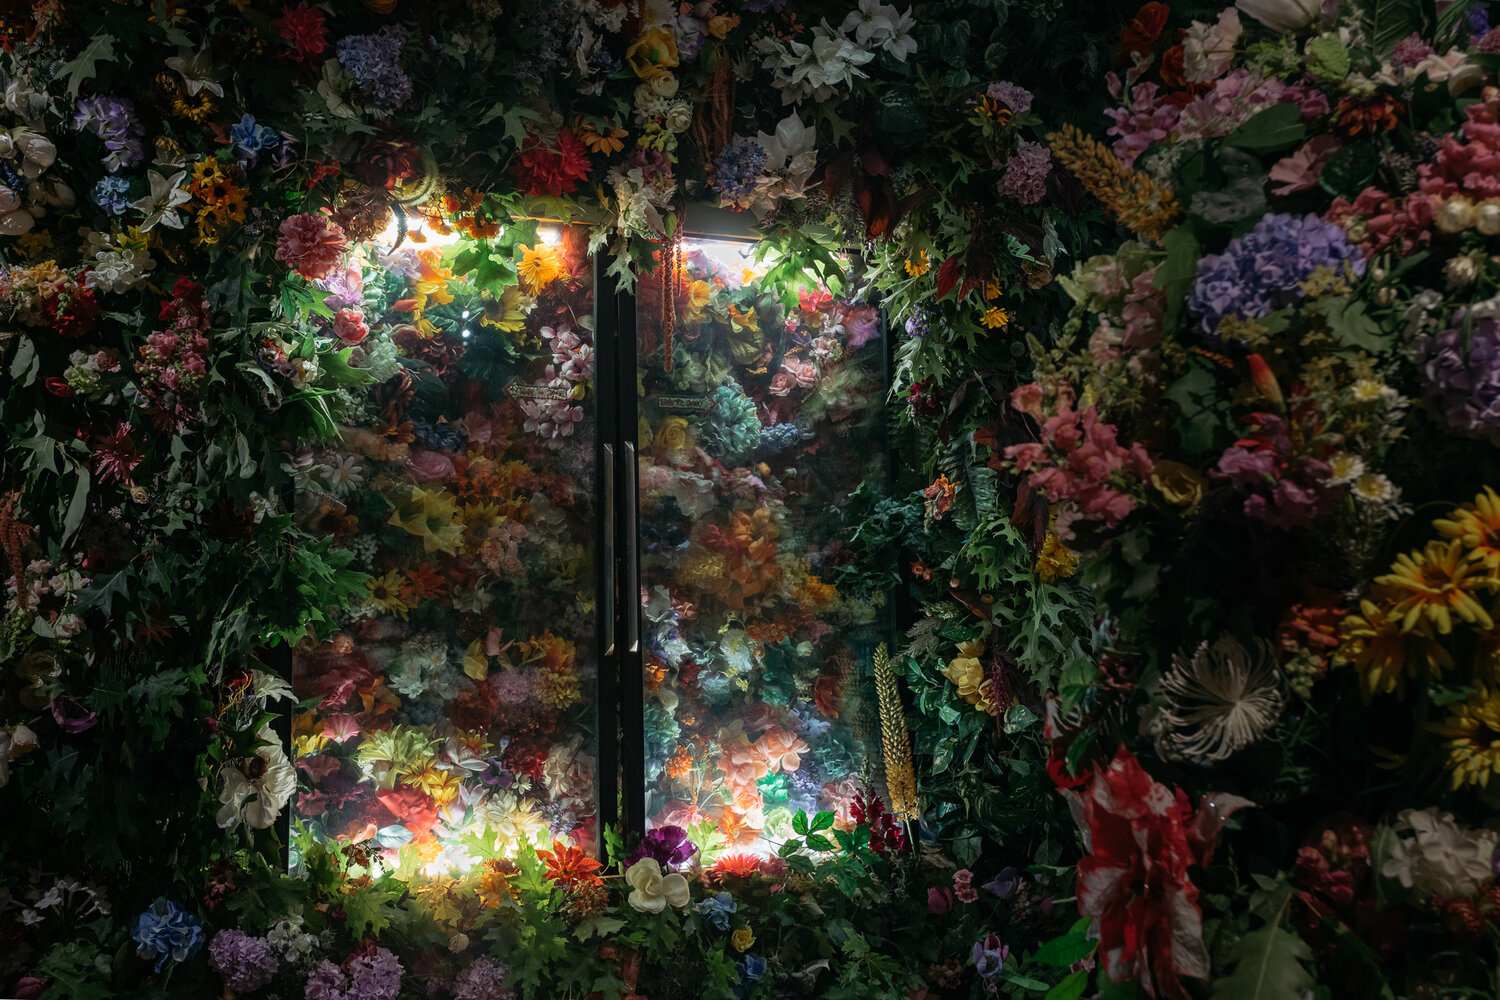 This Party Store Is Overrun by Thousands of Fresh-Cut and Artificial Flowers  - Lisa Waud on Thursd - party+store+3